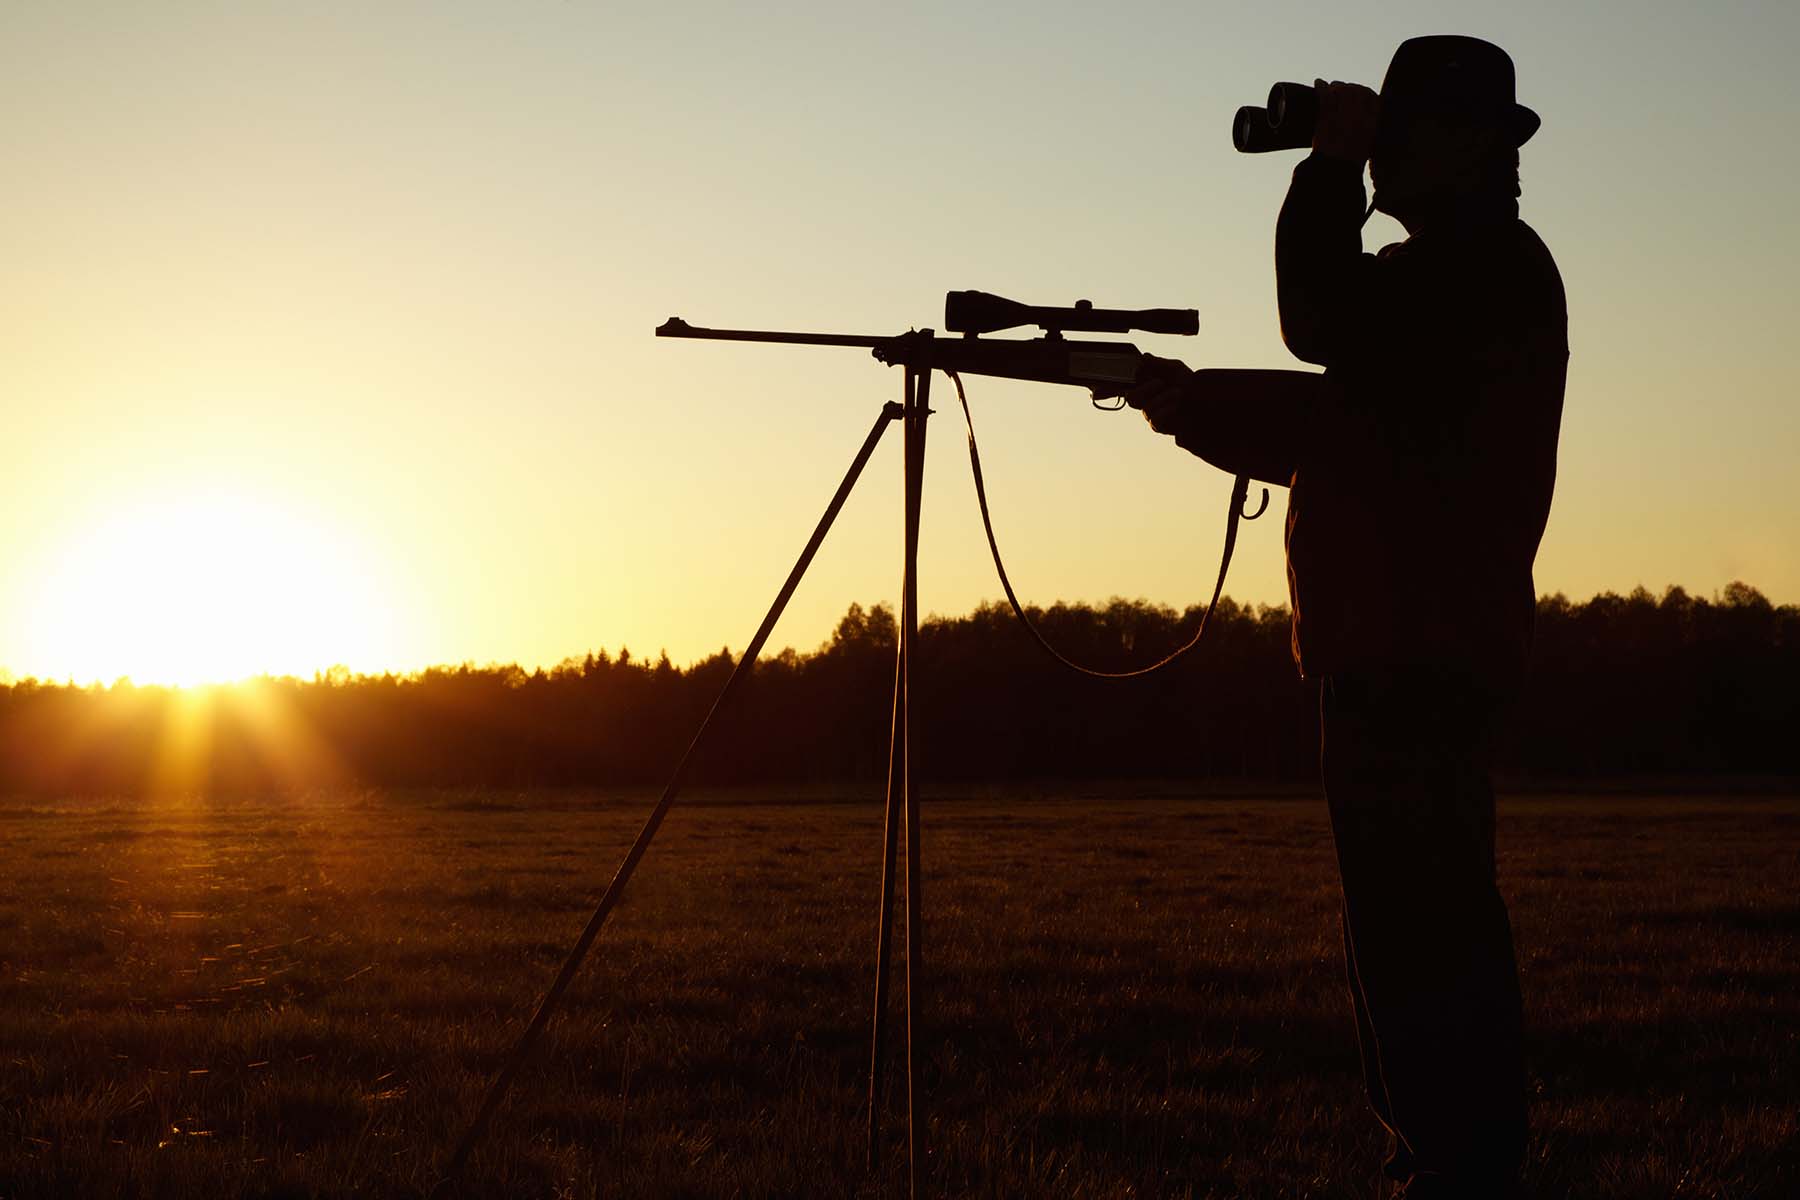 The silhouette of a man wearing a hat and looking through binoculars holds a rifle on top of a tripod.